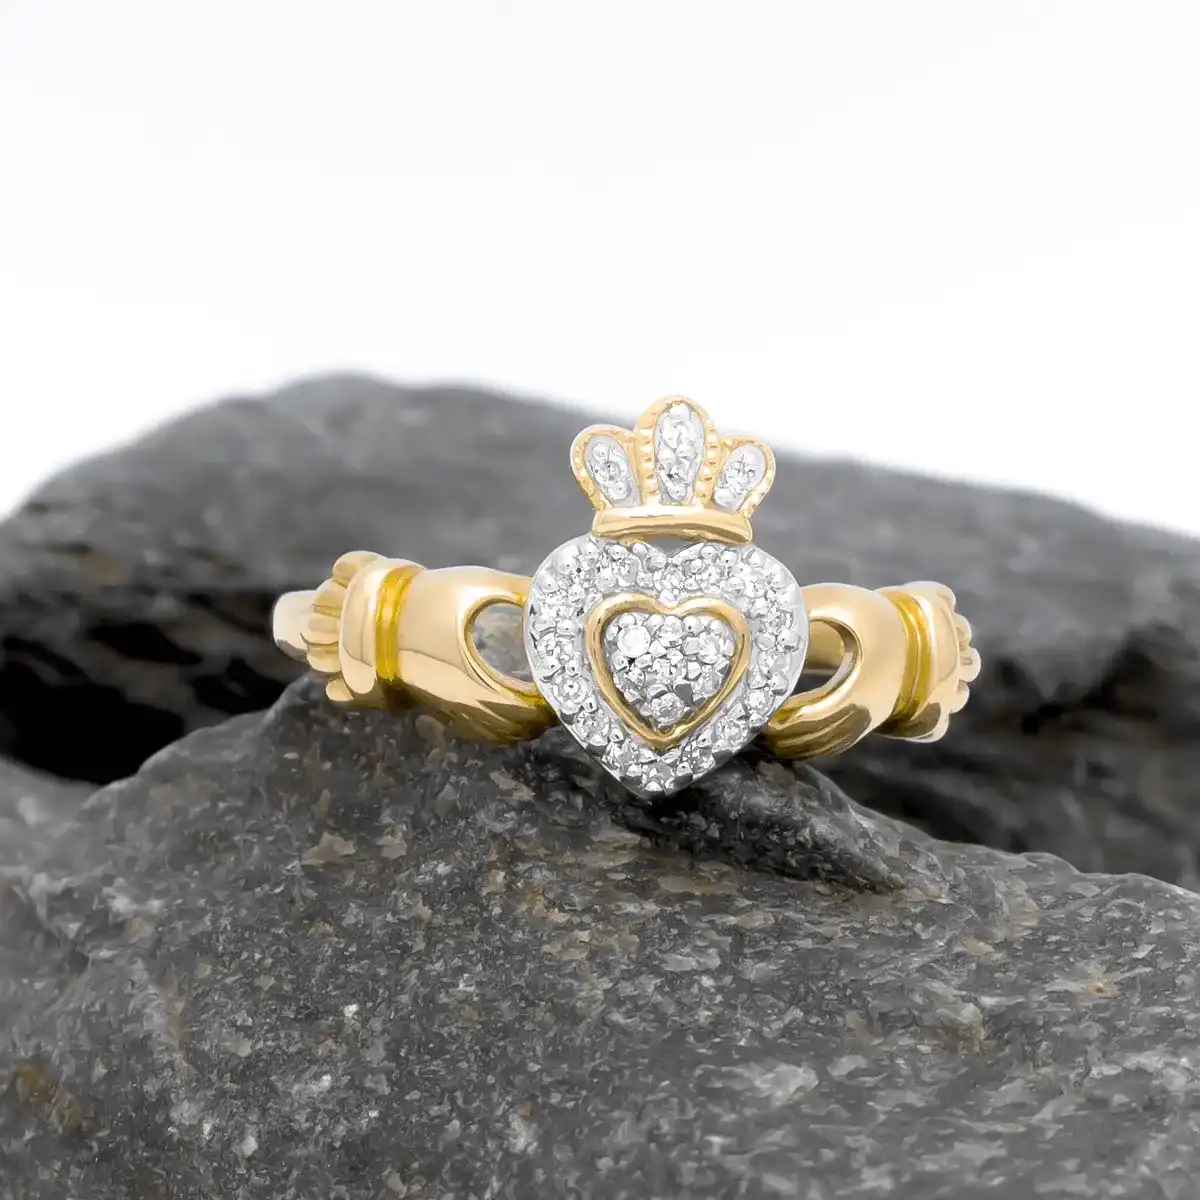 Exquisite Yellow Gold And Diamond Claddagh Ring ...